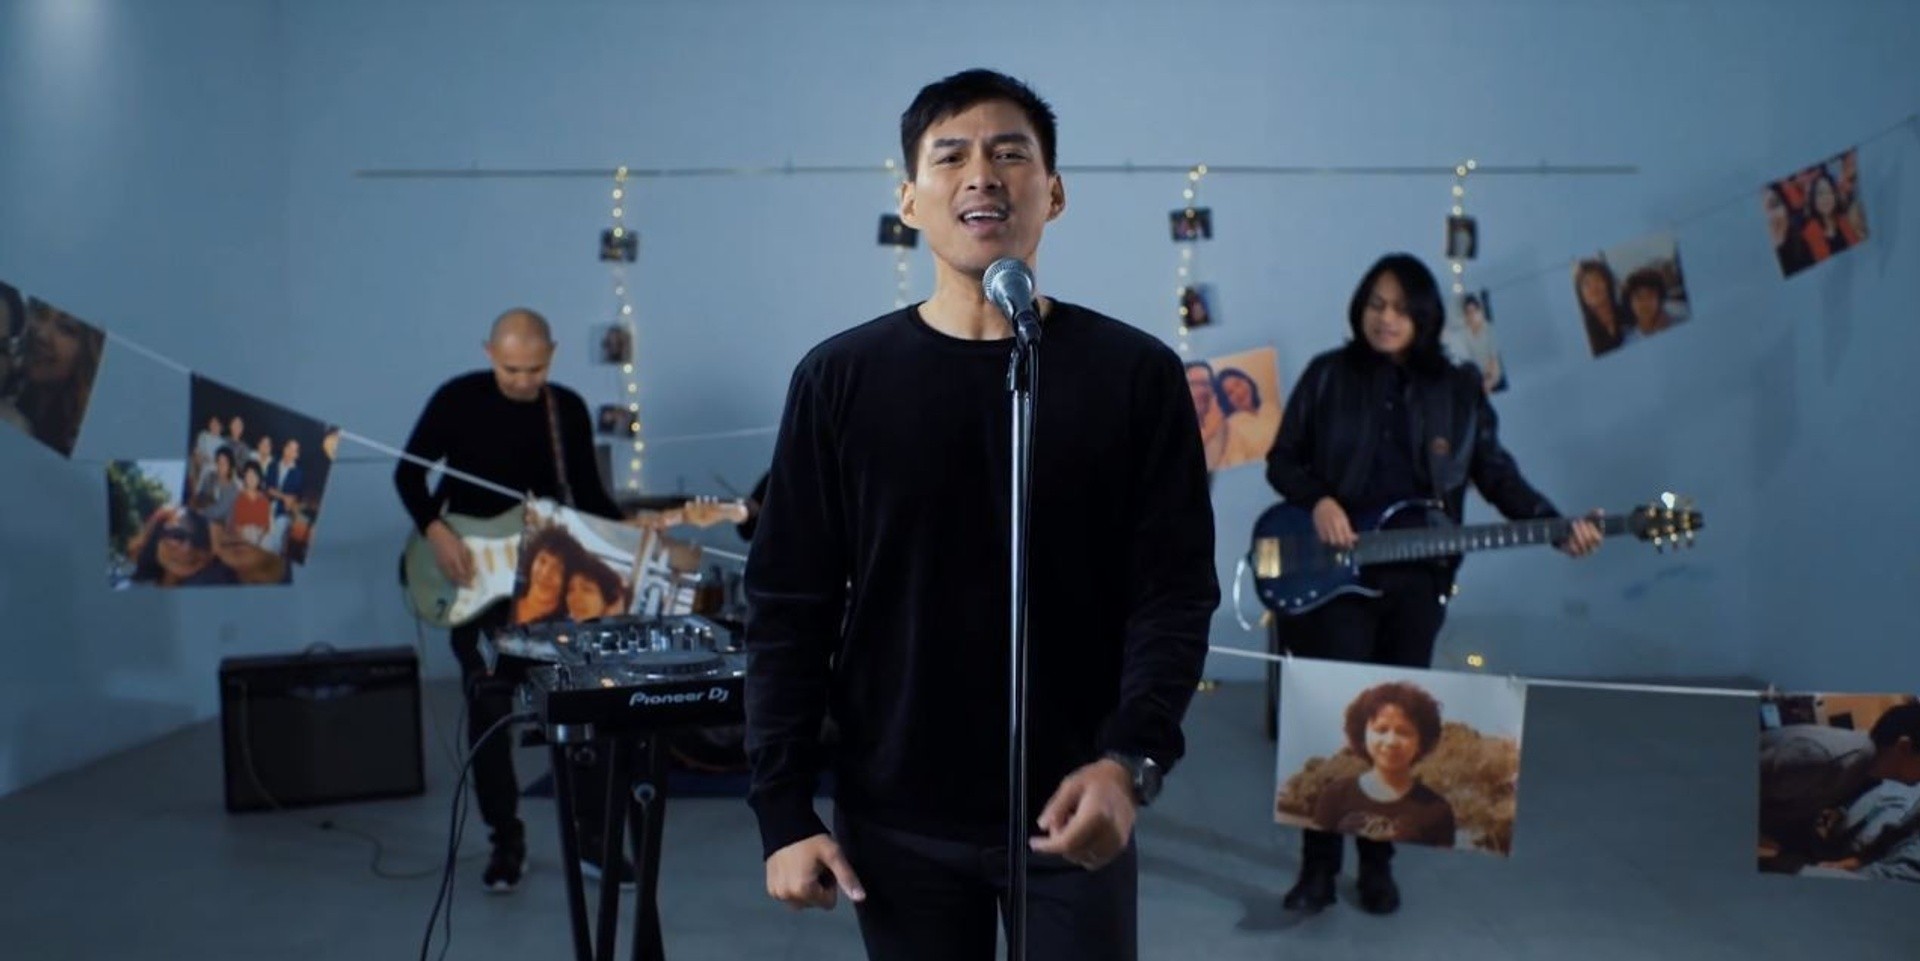 Guji aims to raise cancer awareness with 'Be Alright' music video